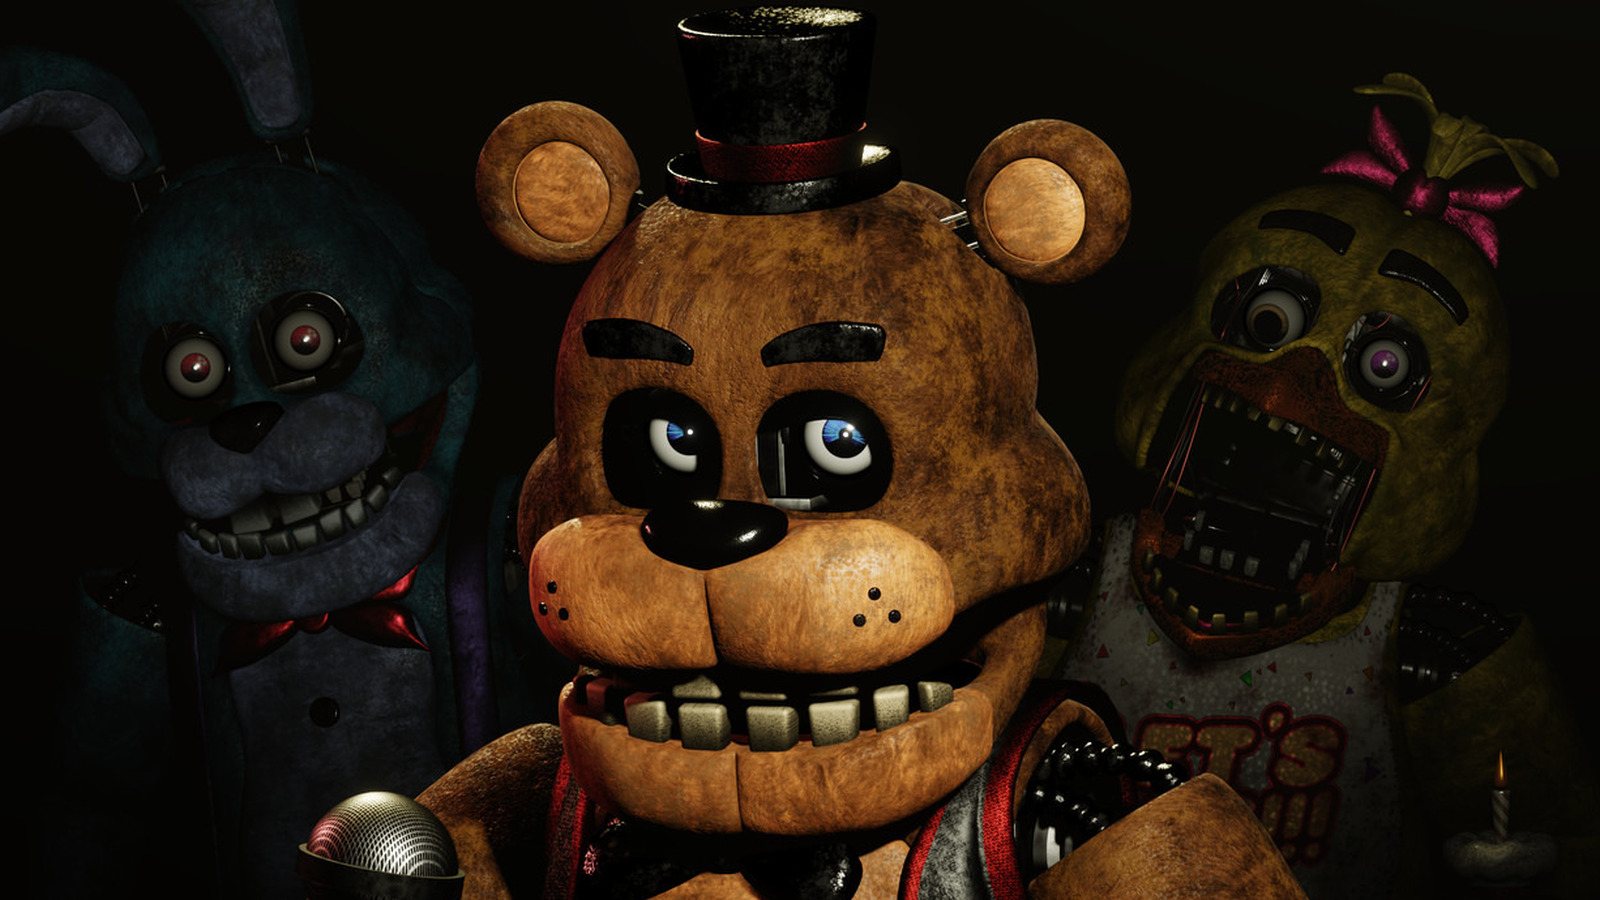 It's A Bummer That Two Clones Beat Five Nights At Freddy's To The Movies